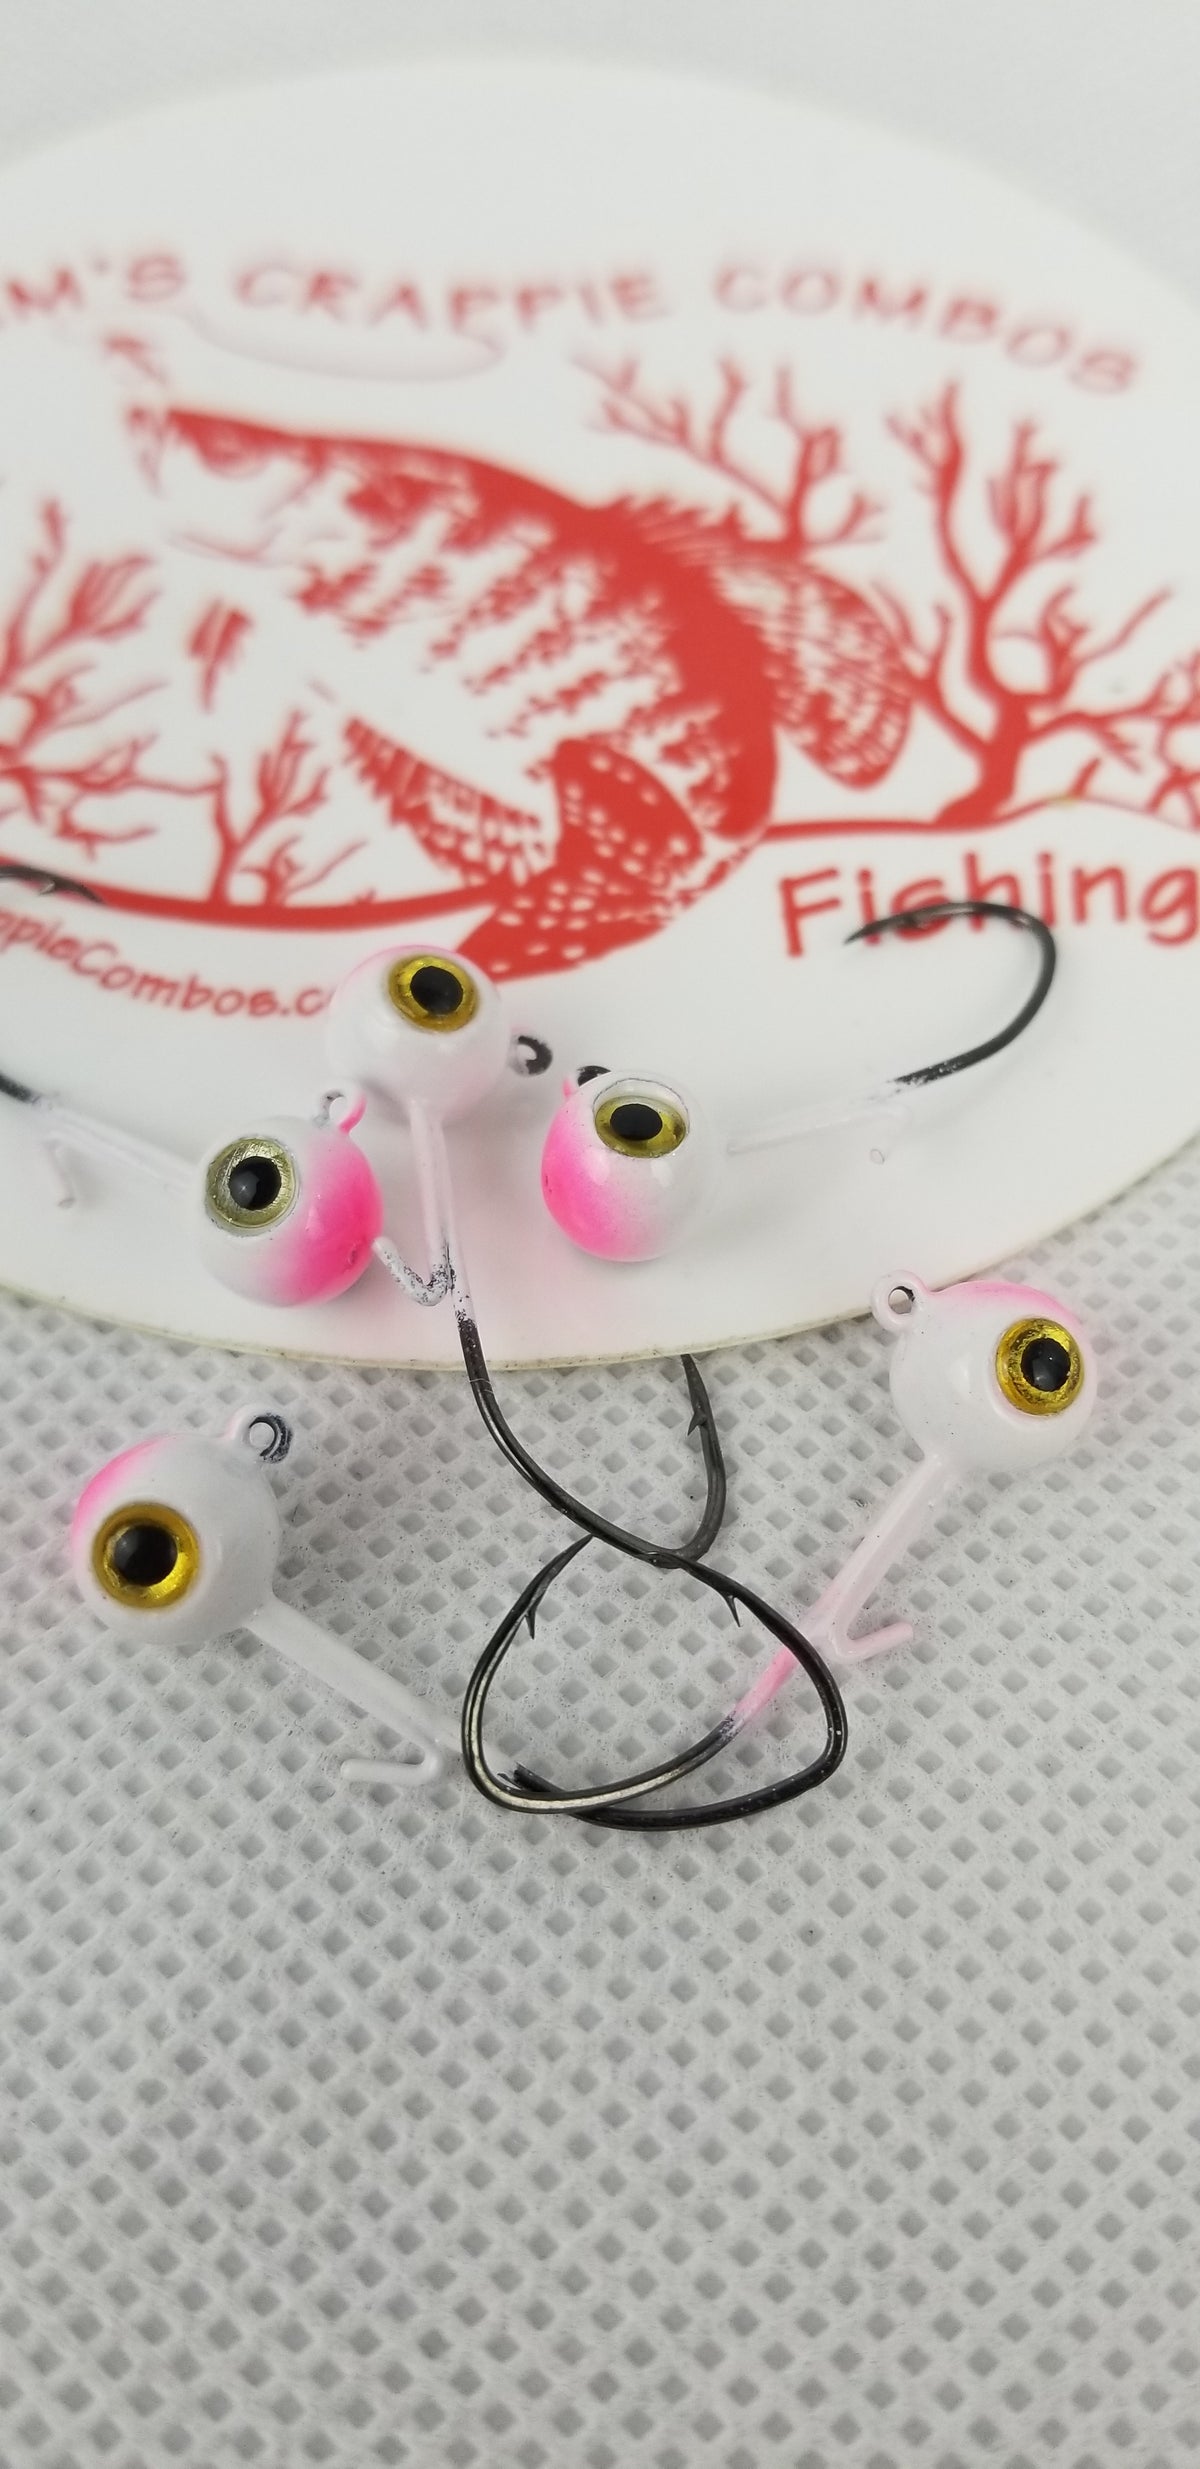 Cam's 20ct. Premium White & Pink (1/16 #4 Nasty Bend Hook) Holographic Life Like Double Paint Jig Head